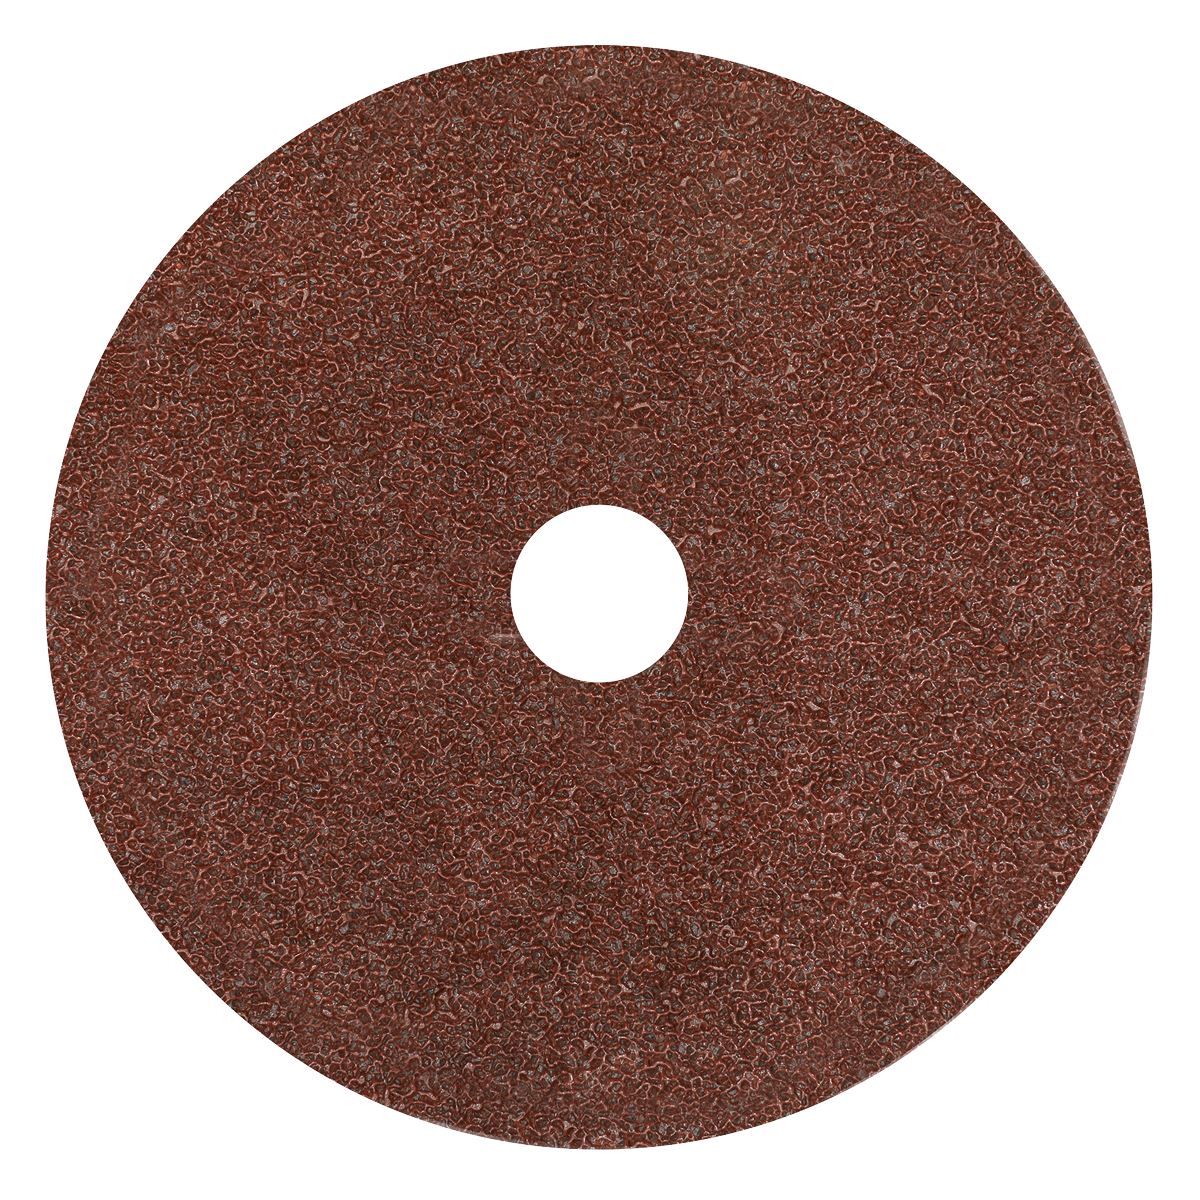 Worksafe by Sealey Fibre Backed Disc Ø100mm - 24Grit Pack of 25